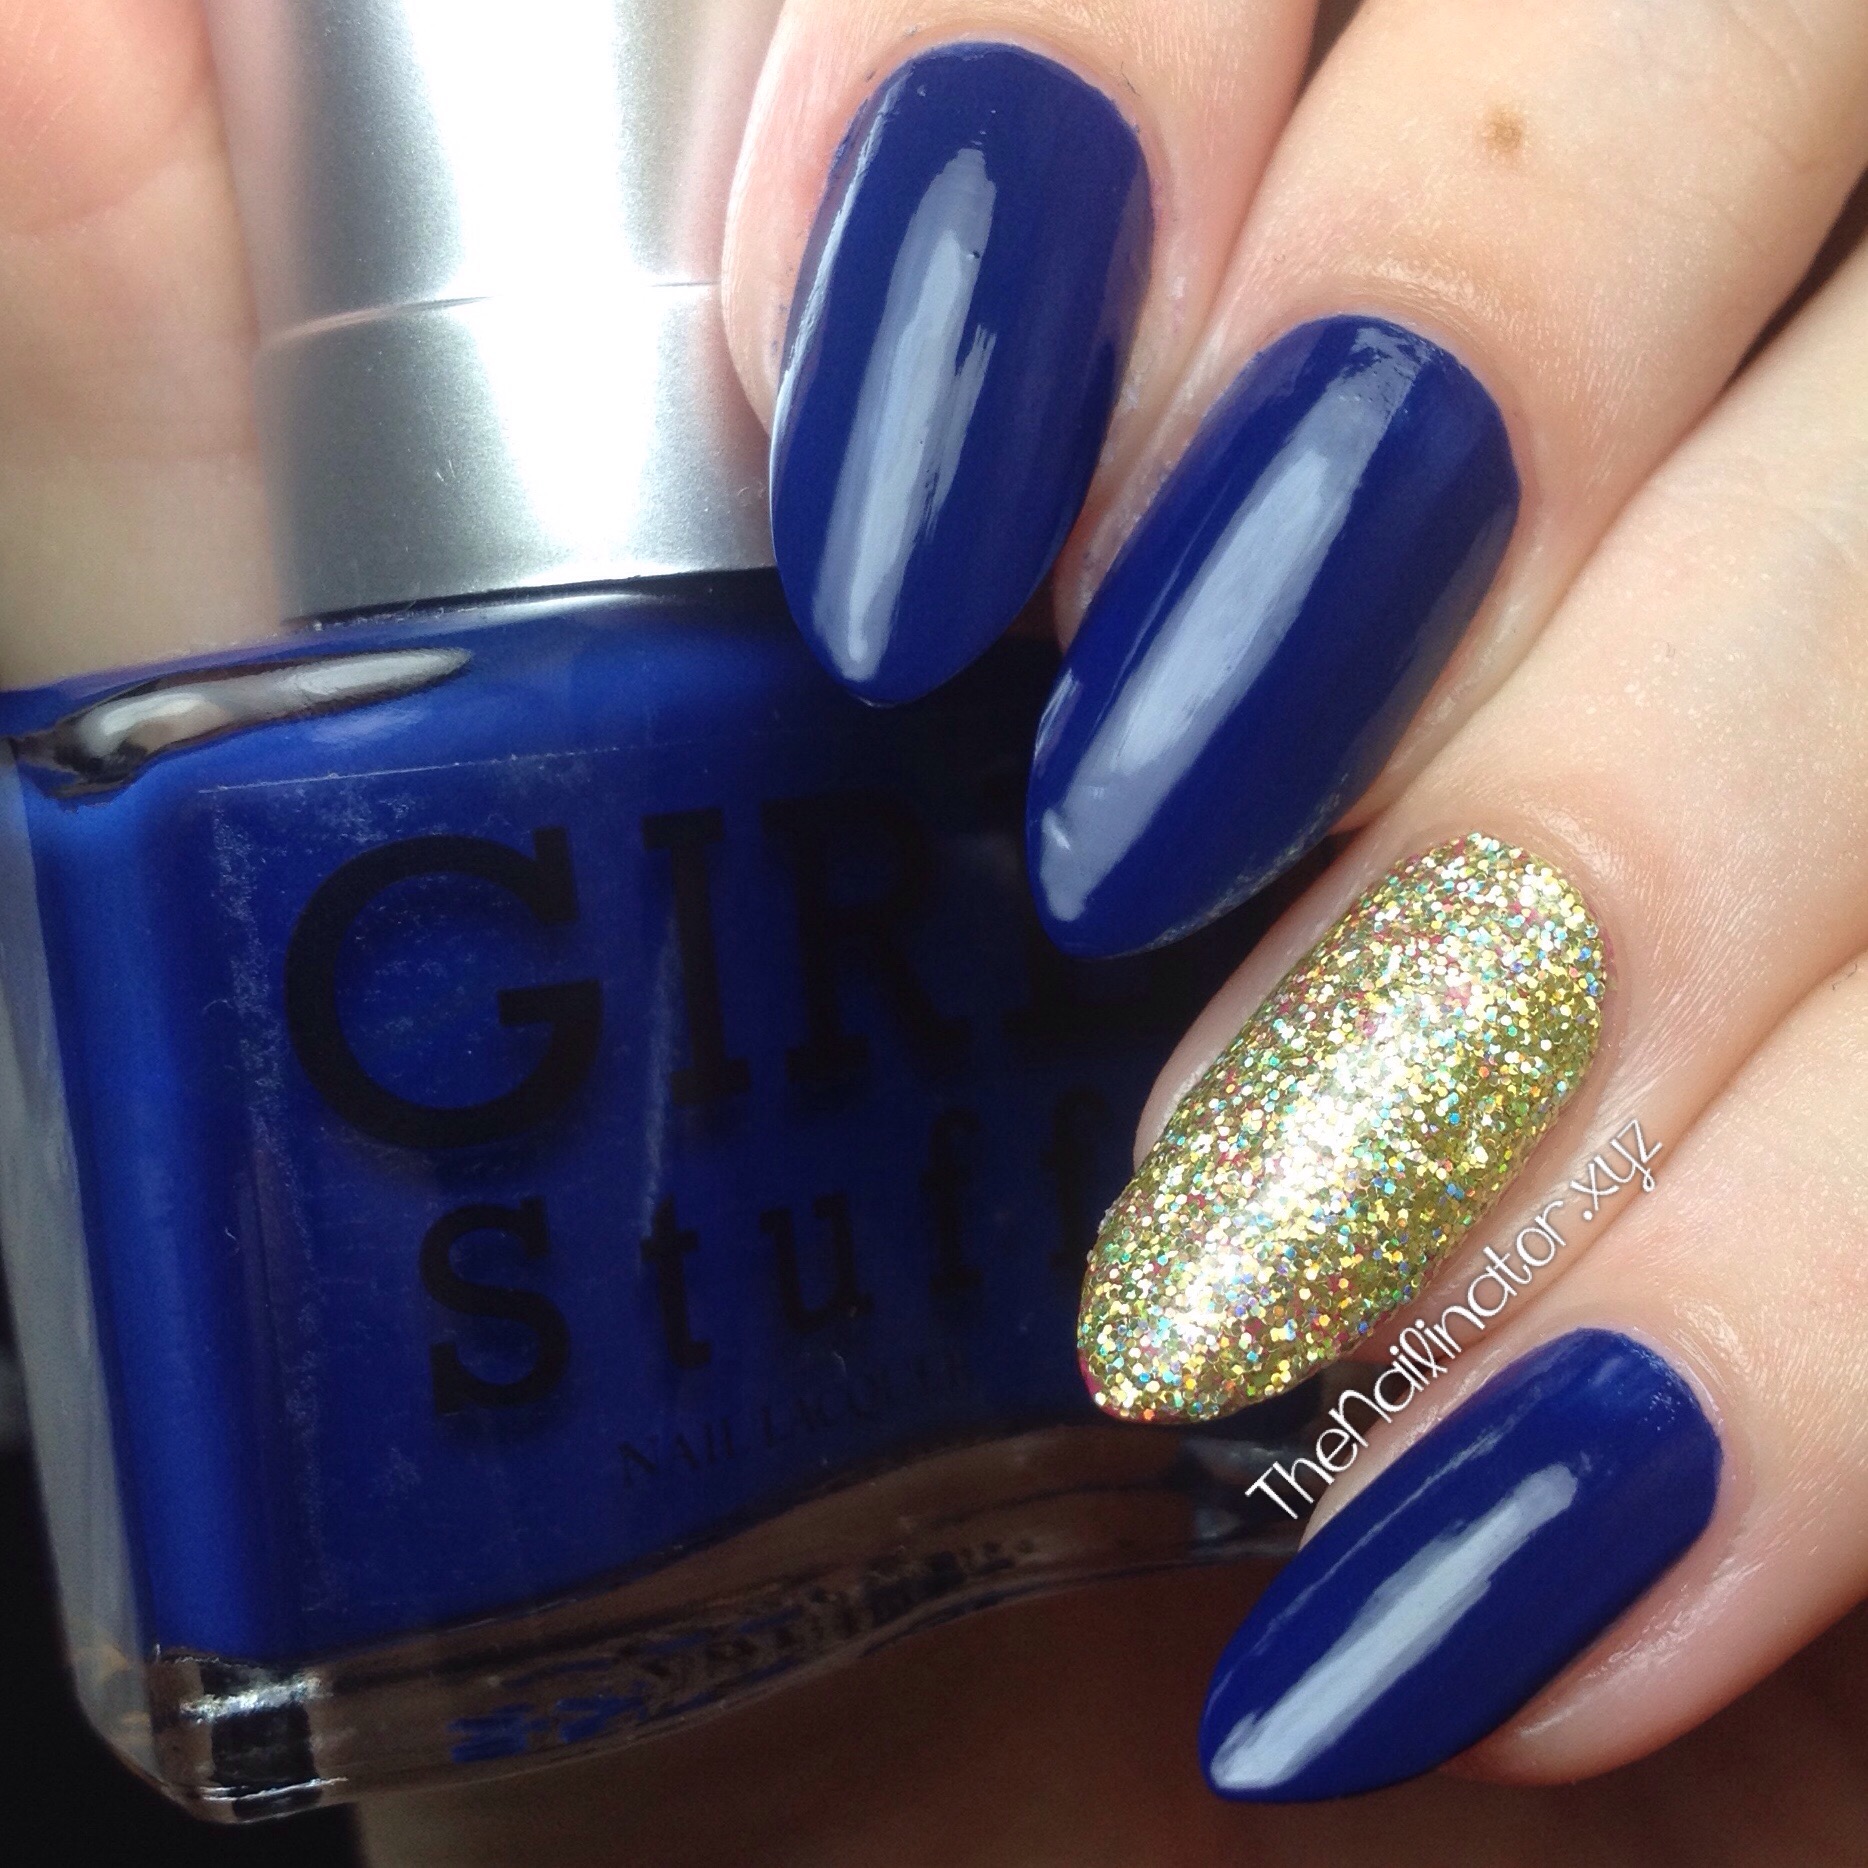 Girlstuff Blues with 24K sponged accent nail